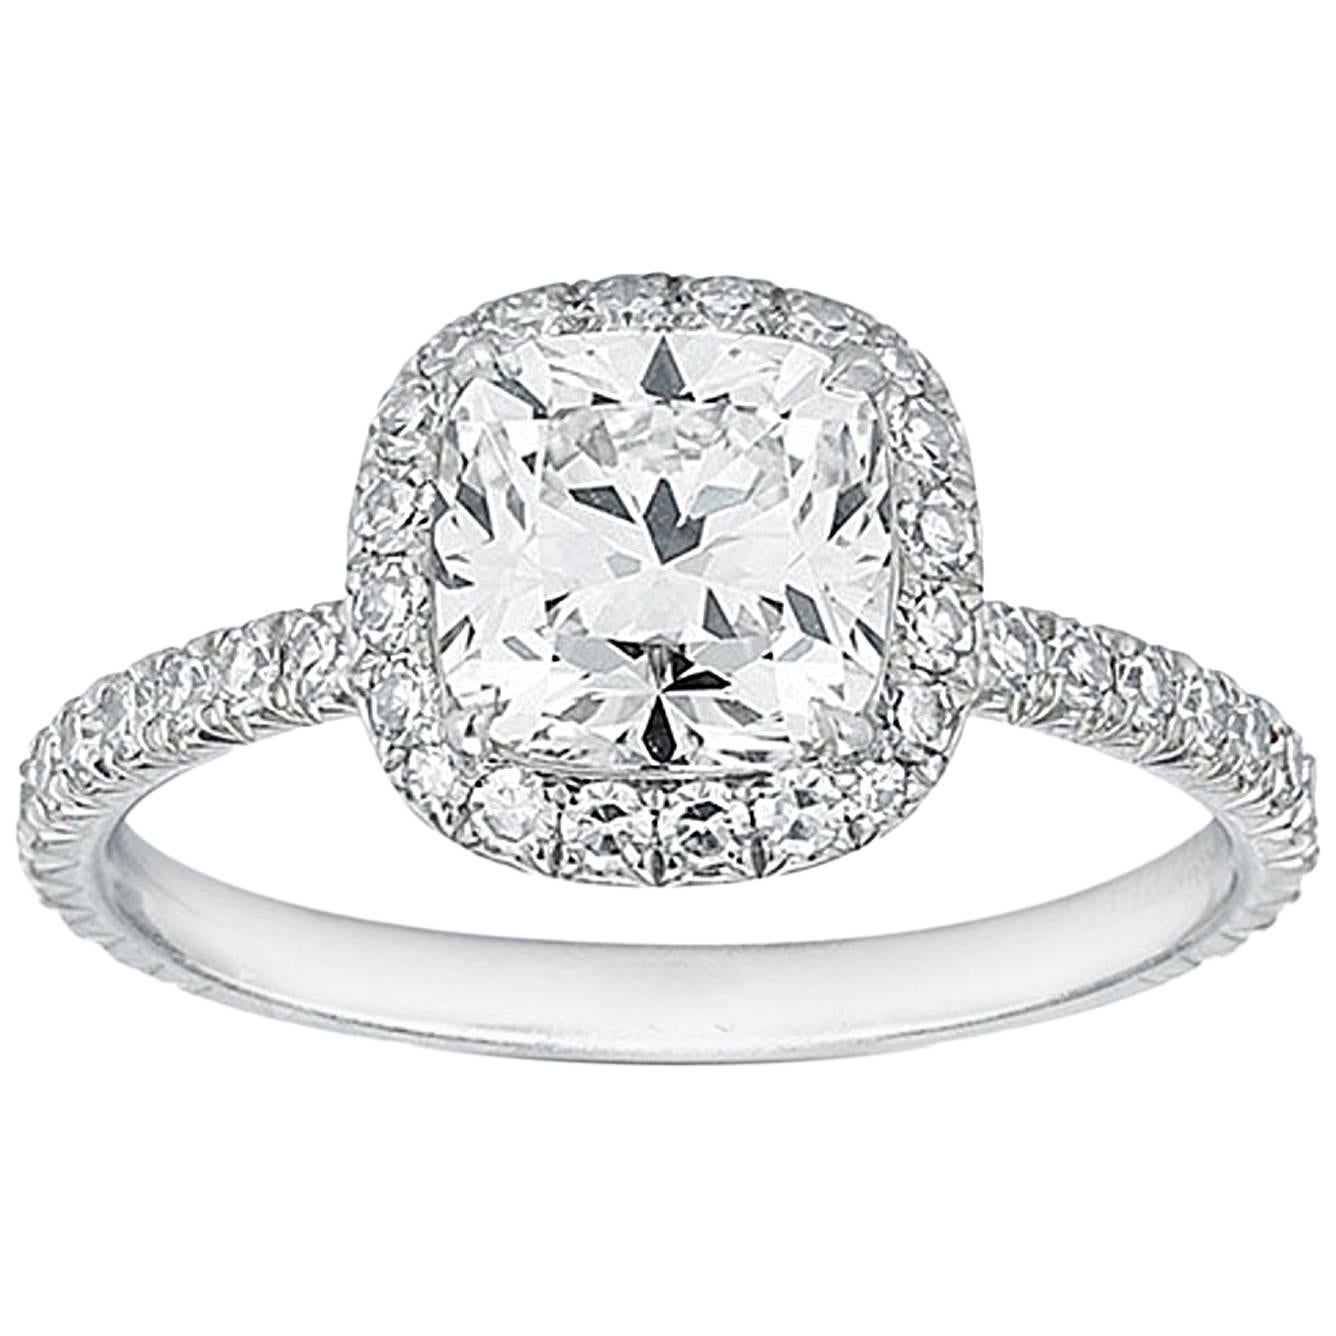 Marisa Perry Micro Pave 1.54 Carat Cushion Cut Diamond Engagement Ring For Sale